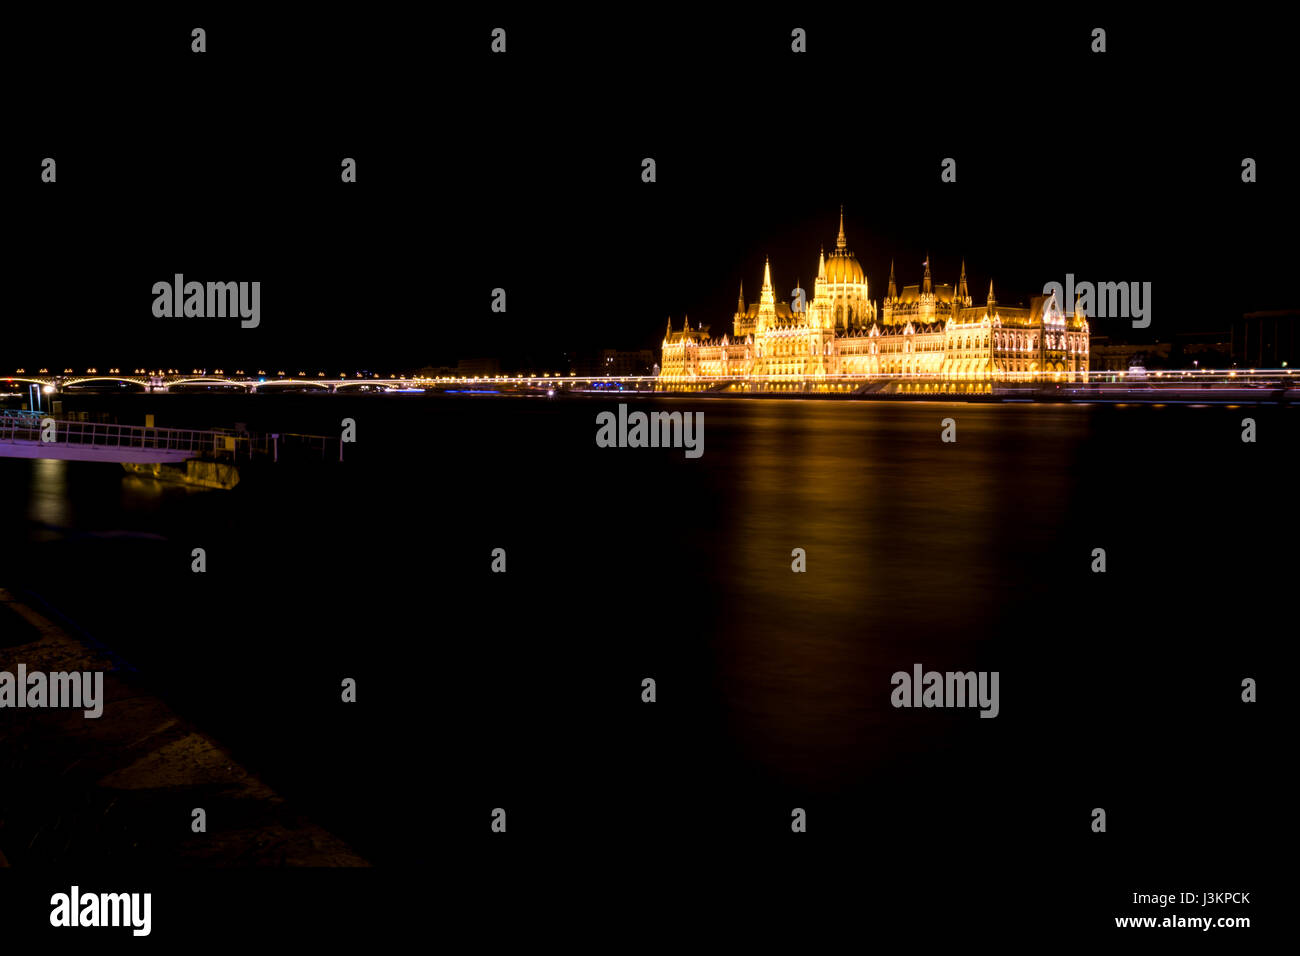 The Hungarian Parliament building lit up at night, across the River Danube, with the lights reflecting in the river. Stock Photo